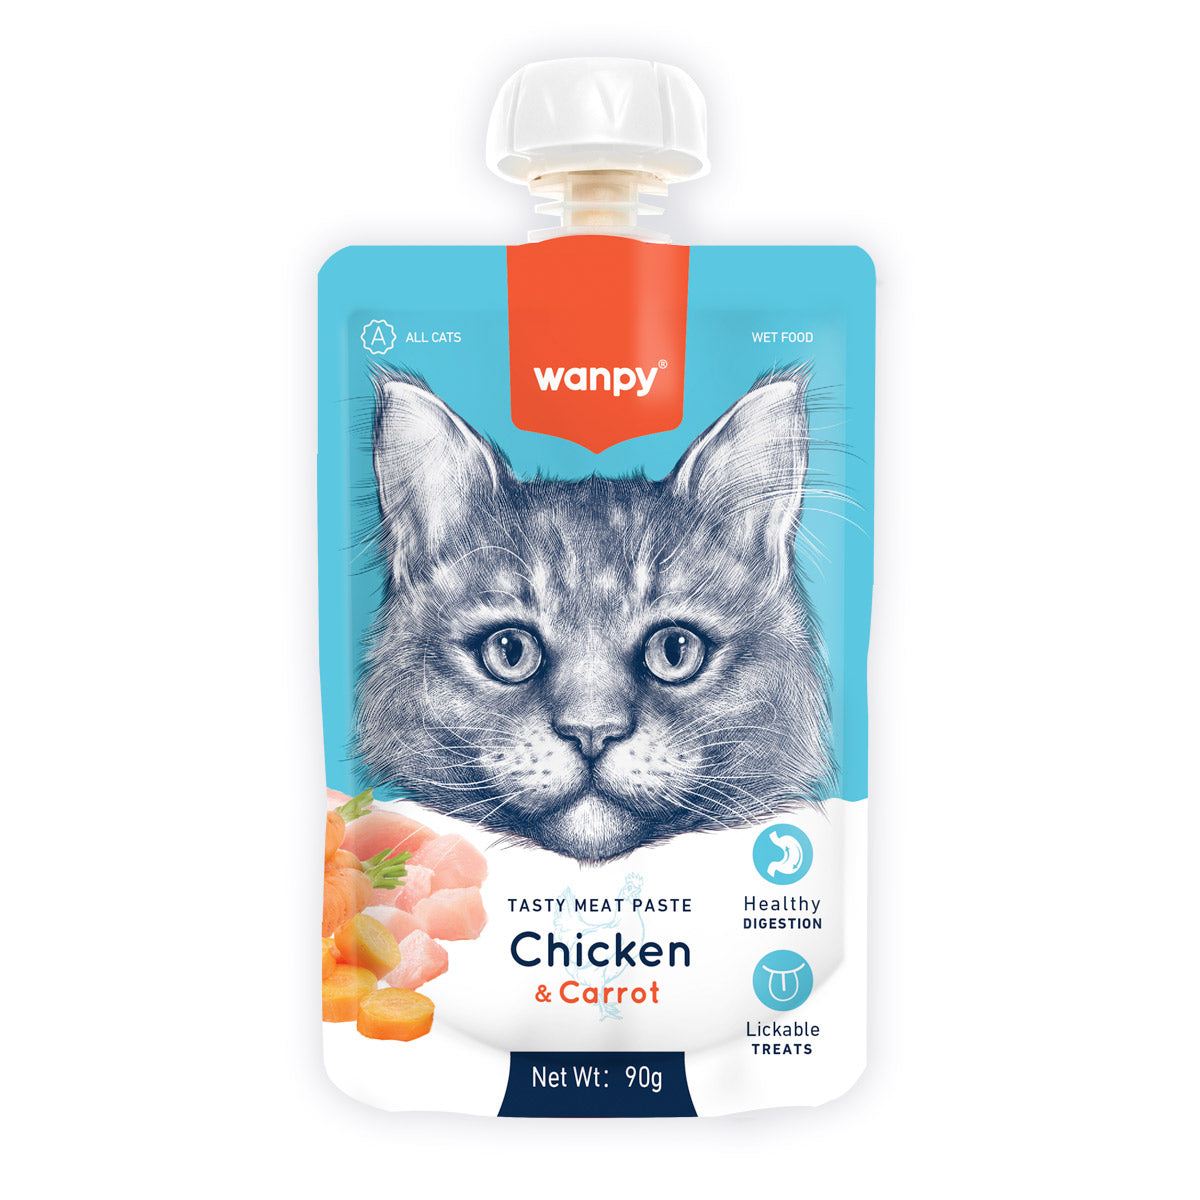 Wanpy Tasty Meat Paste Chicken with Carrot for Cats 90g